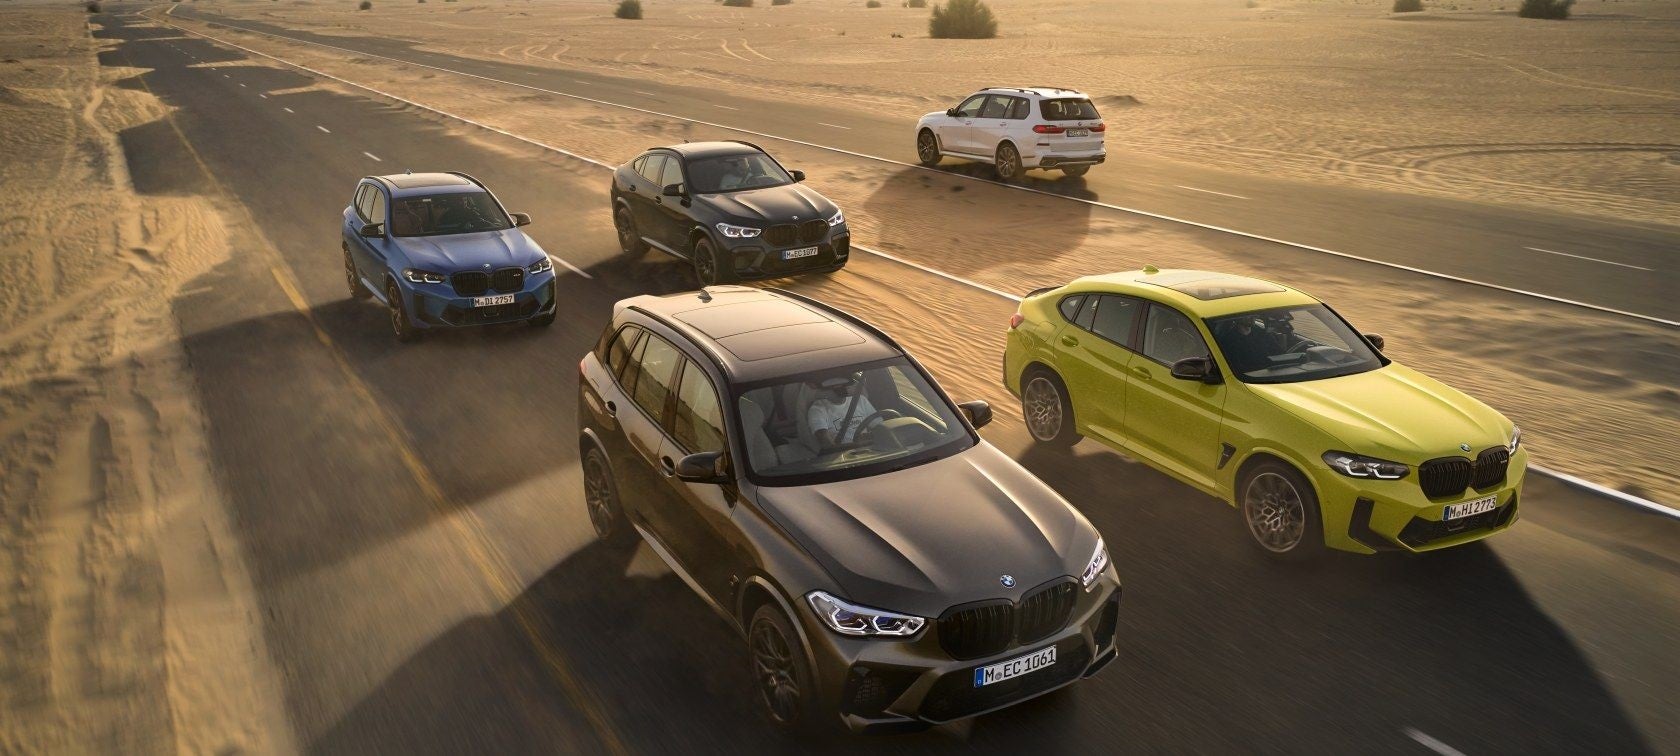 5 vehicles in the BMW M lineup